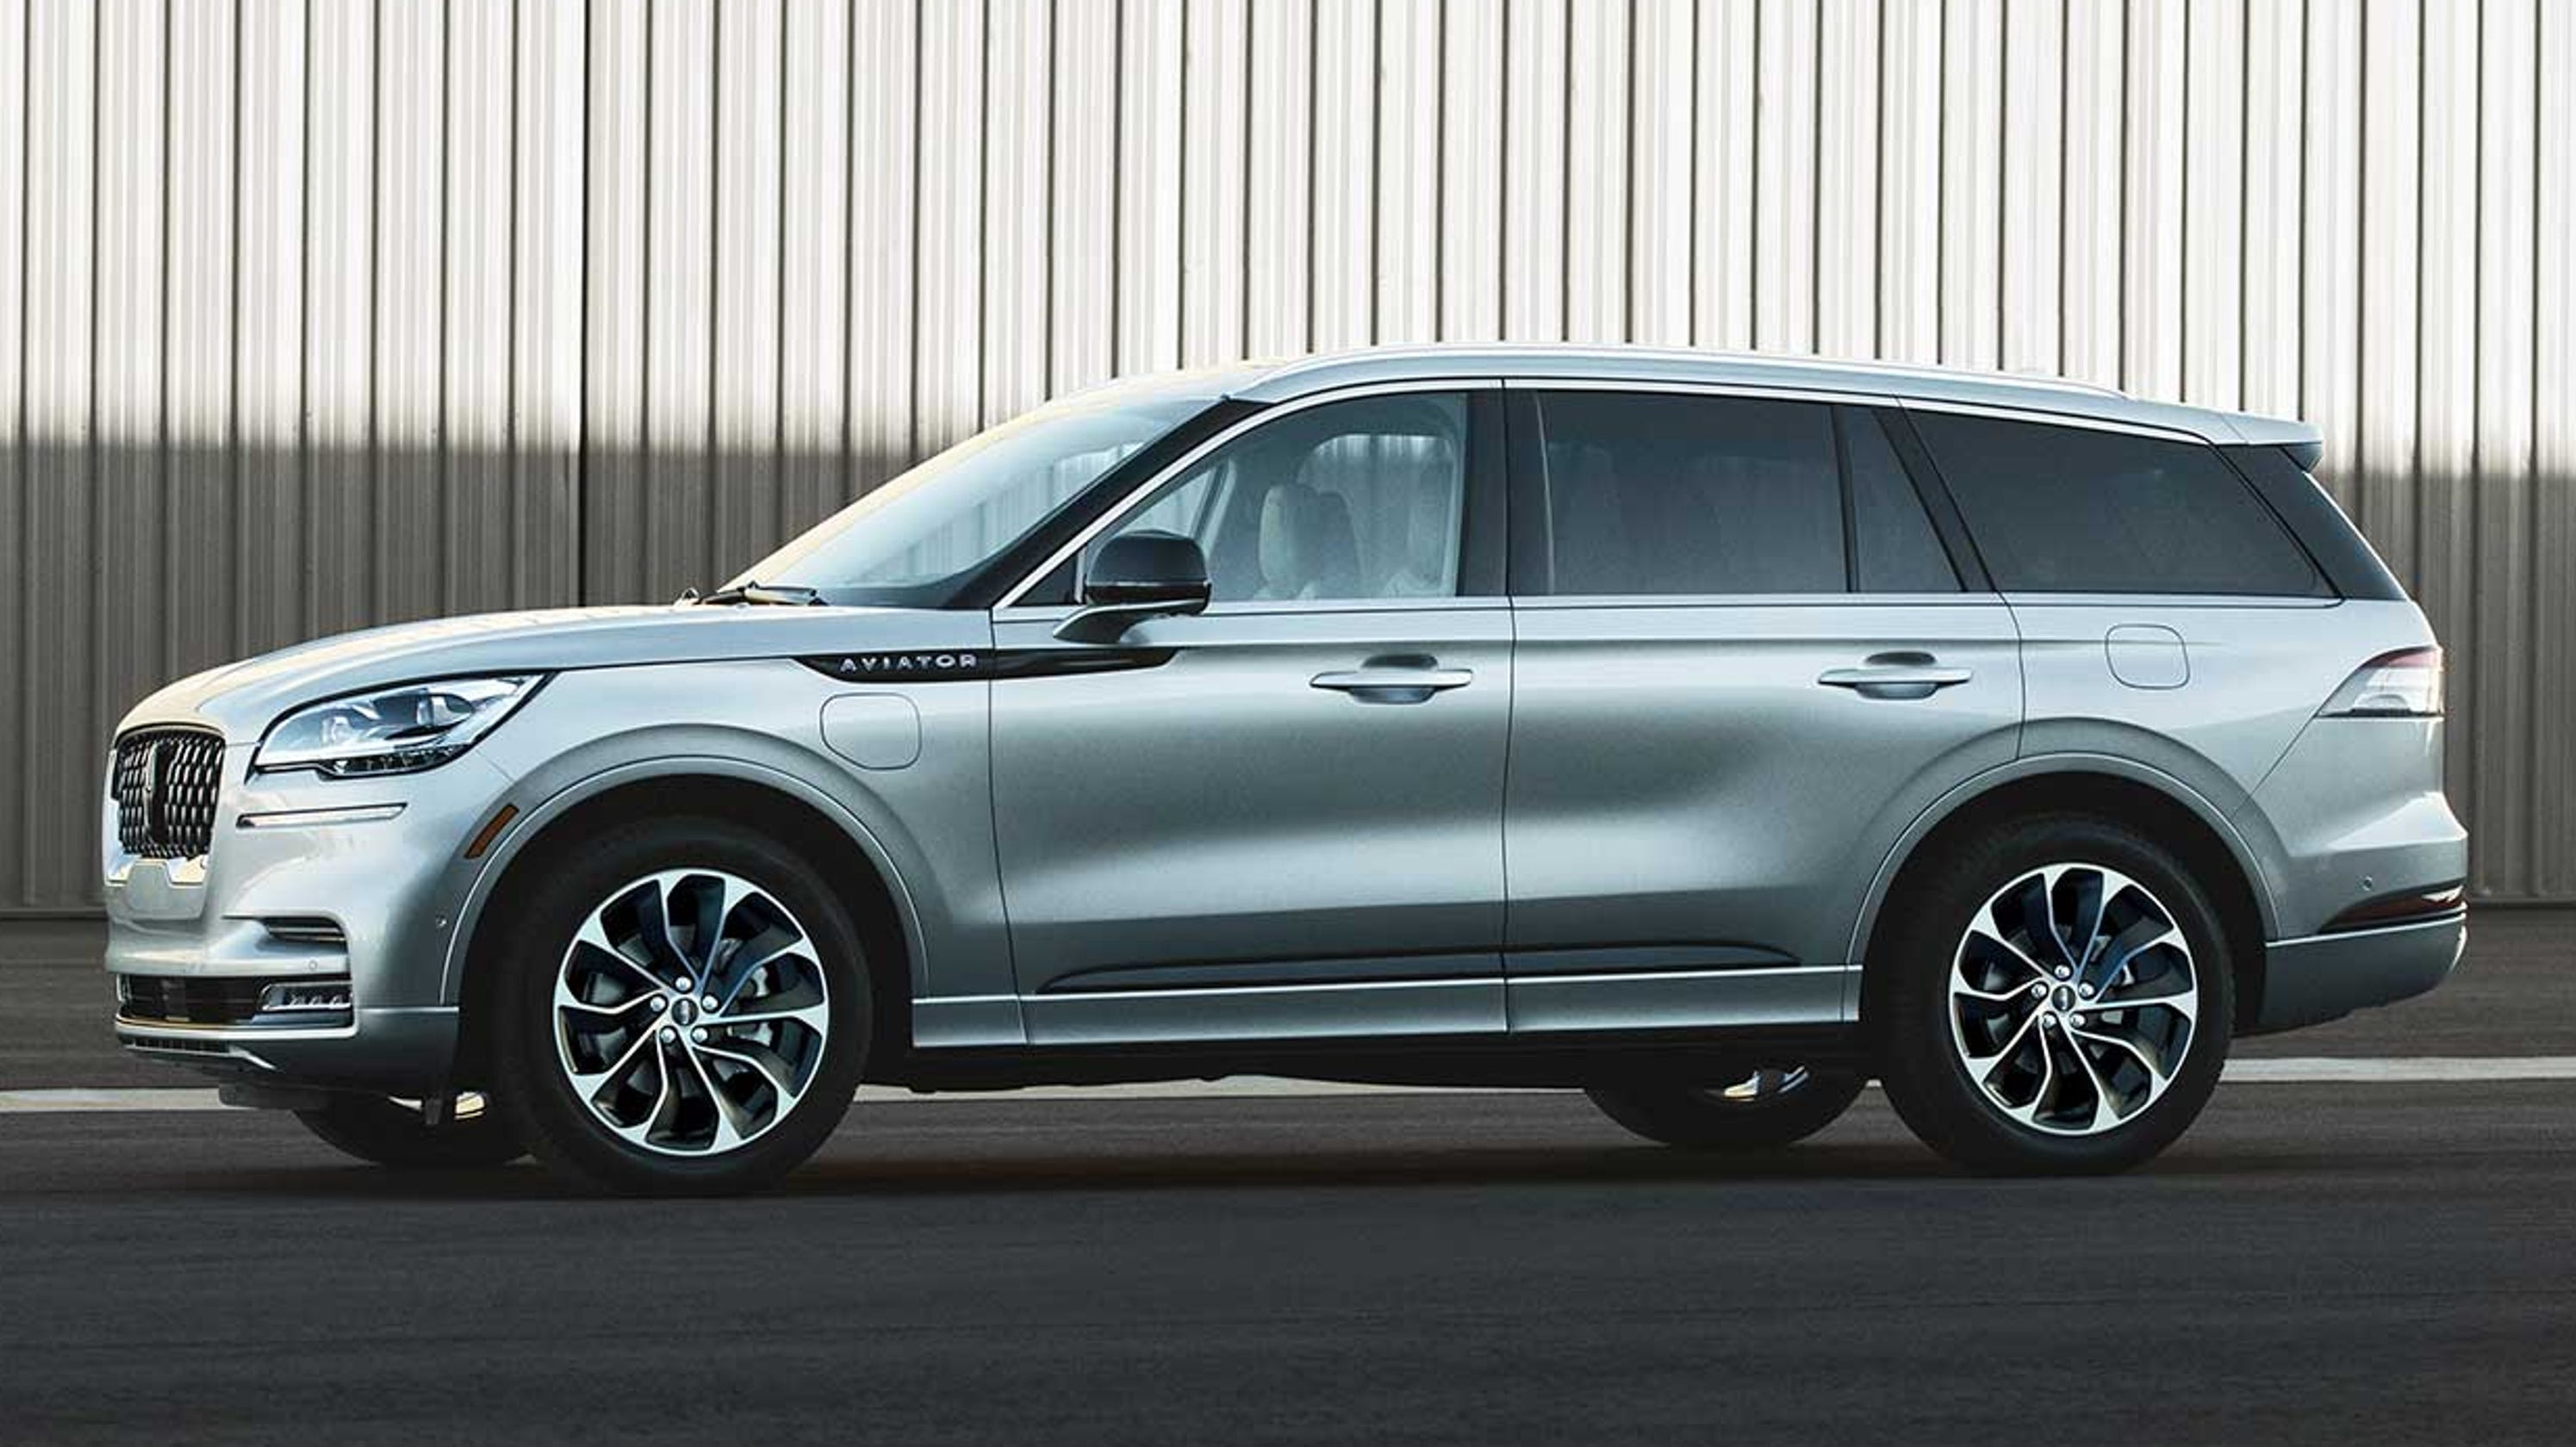 lincoln-aviator-adds-muscle-to-its-luxurious-looks